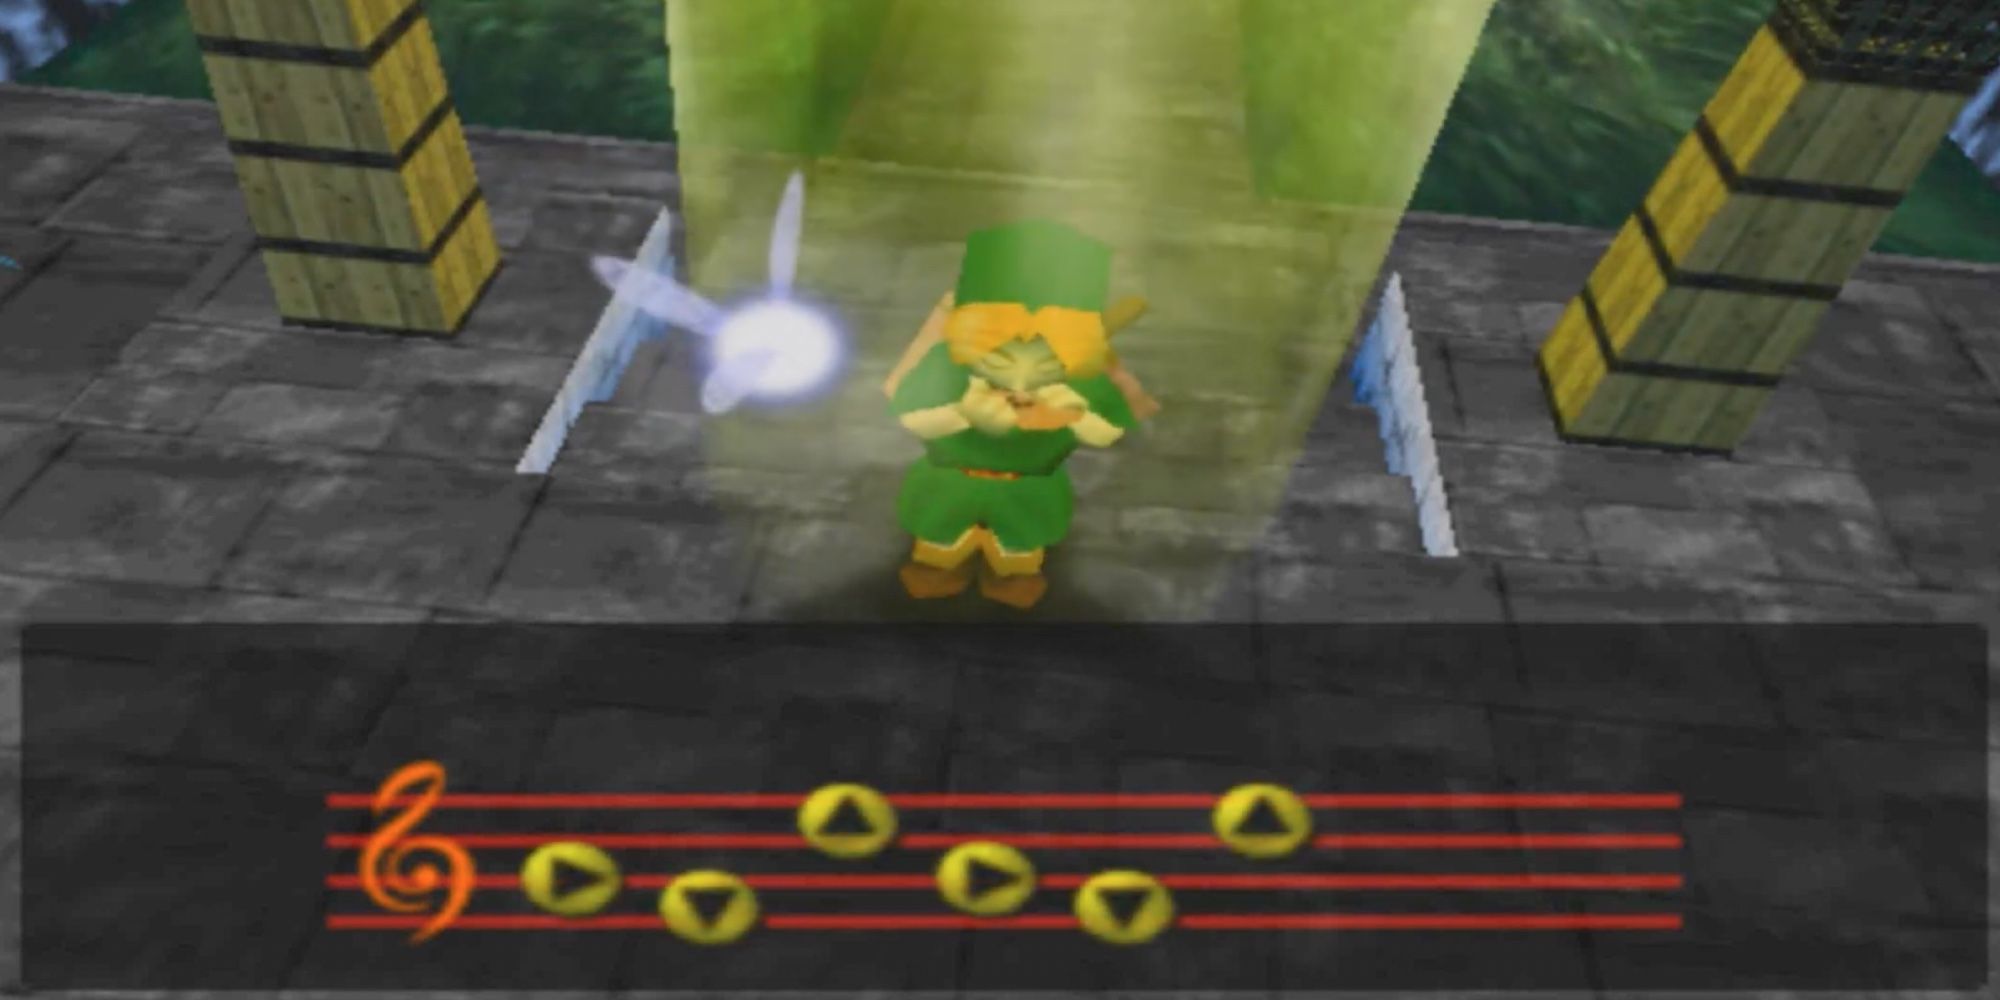 Legend of Zelda - Ocarina of Time - Link playing a song